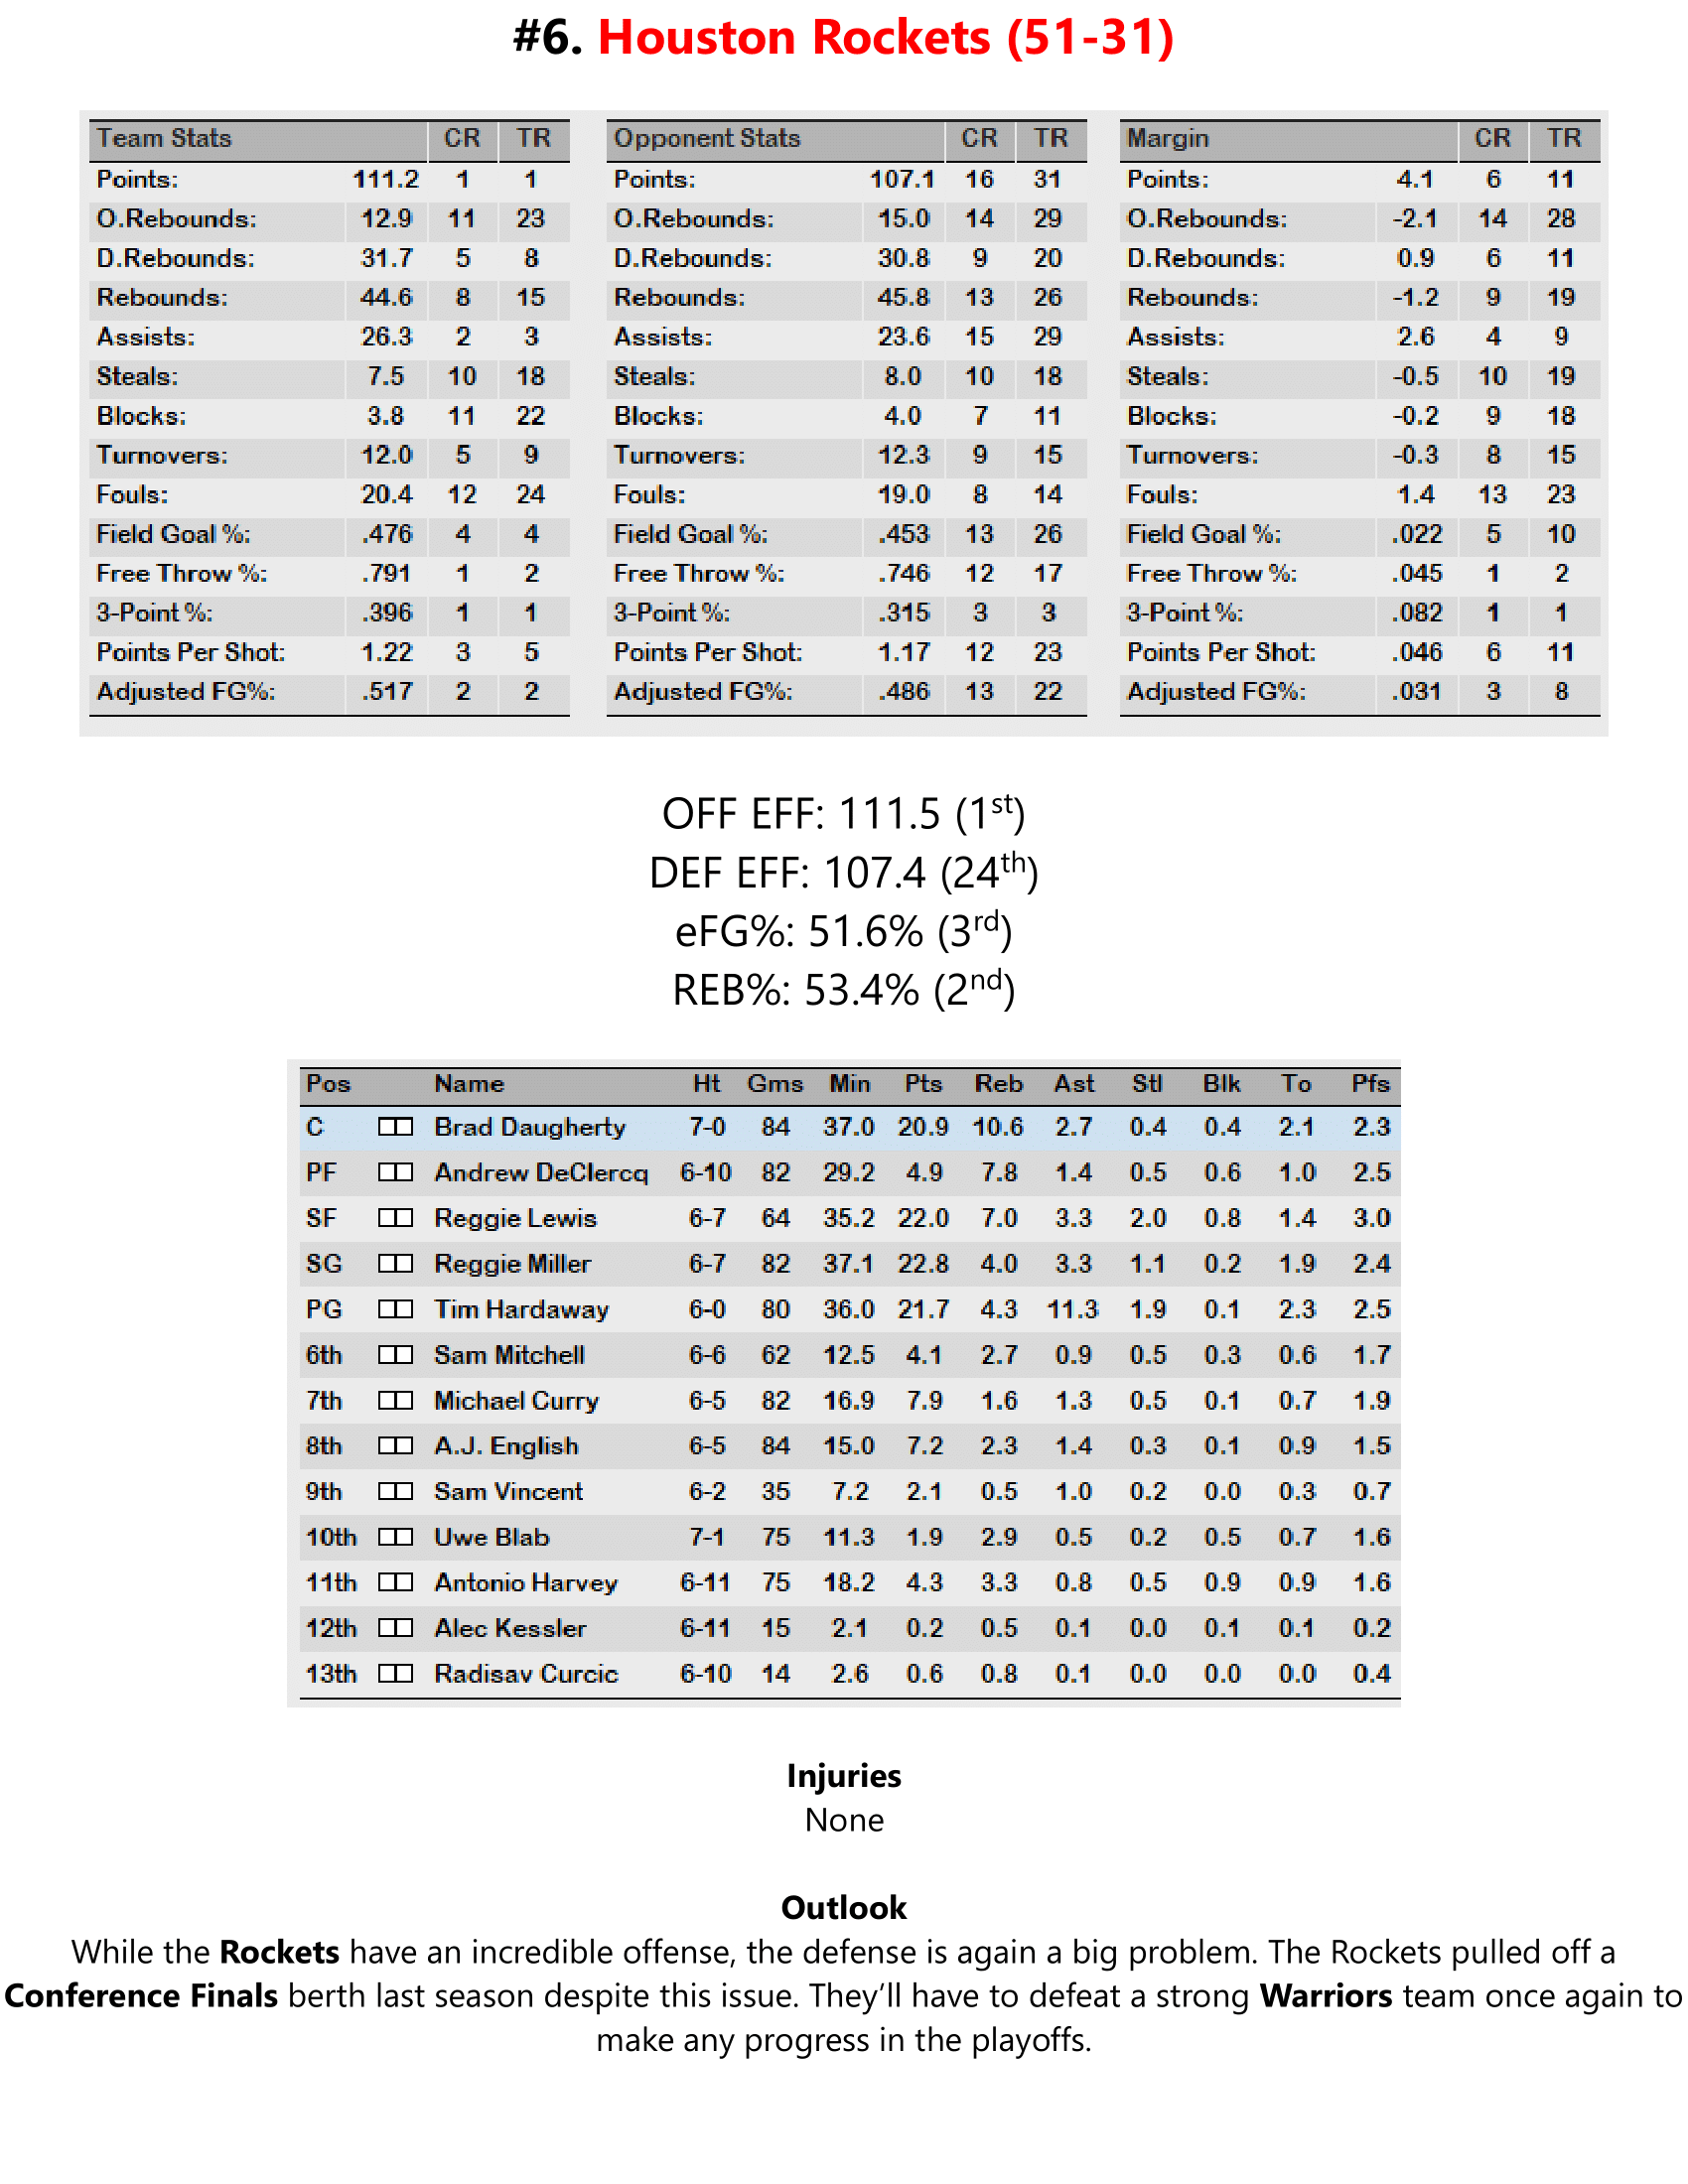 95-96-Part-3-Playoff-Preview-07.png